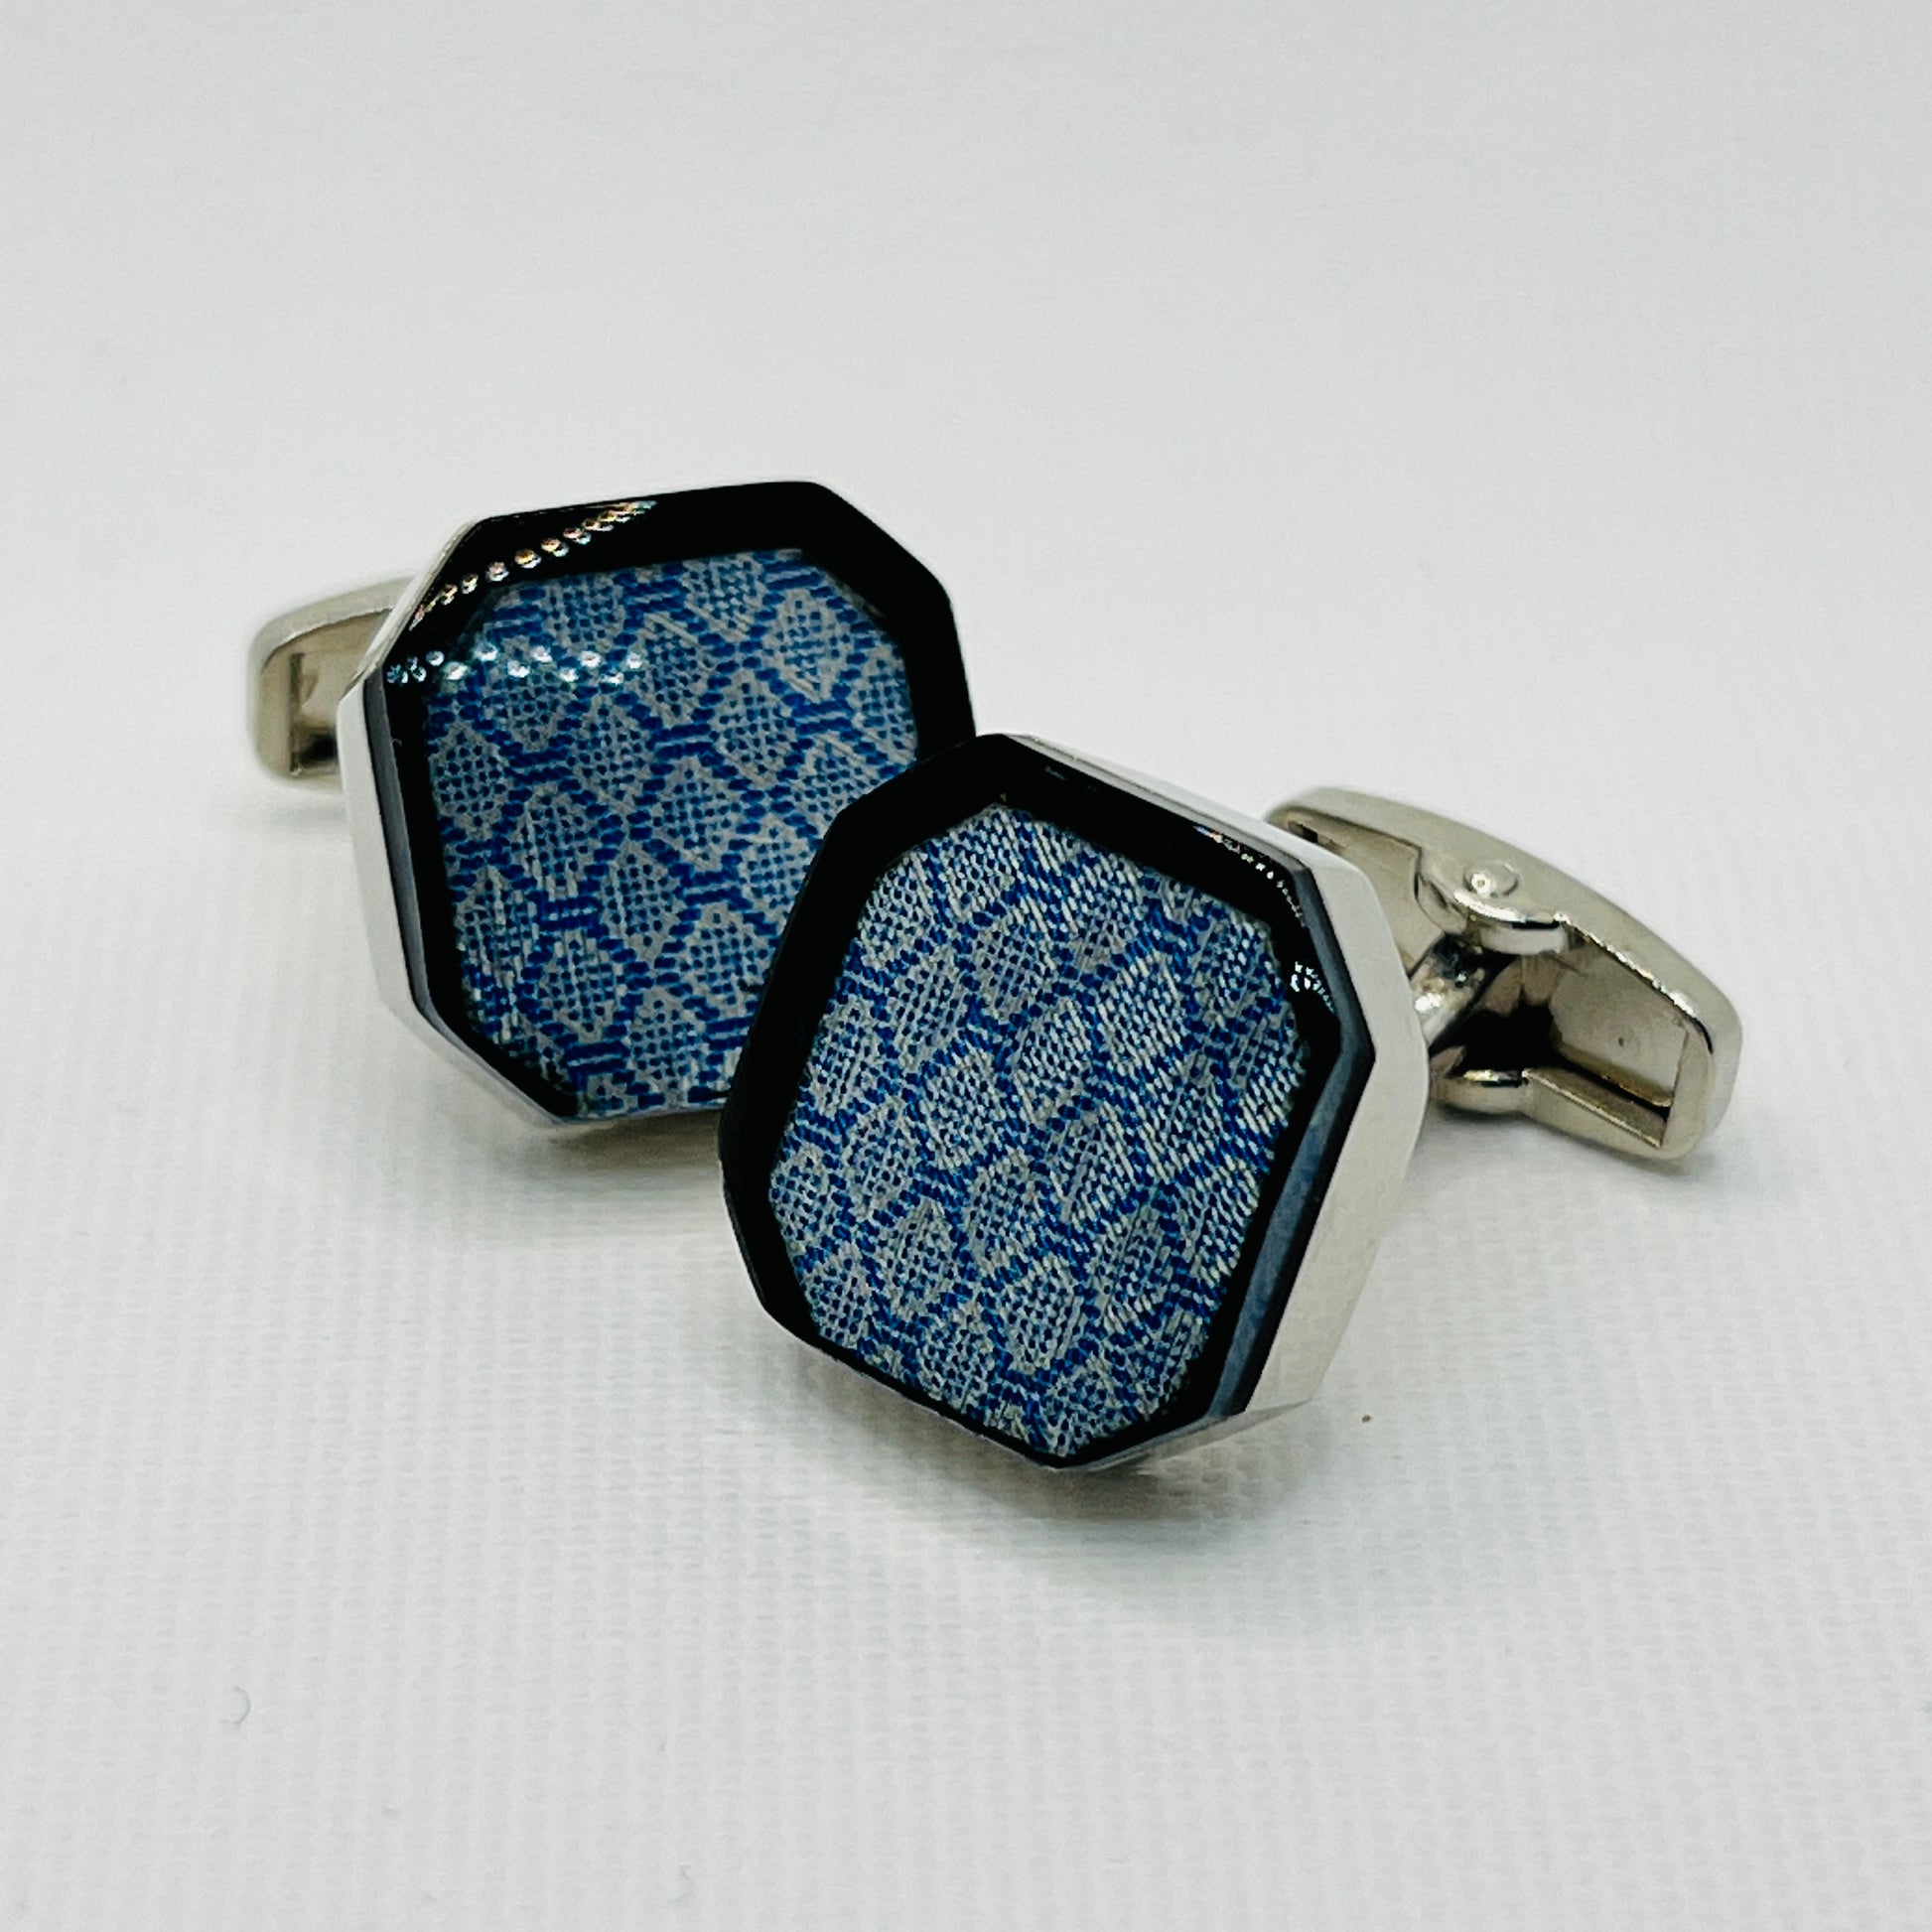 Tasker & Shaw | Luxury Menswear | Silver square octagonal cufflinks with blue patterned inlay